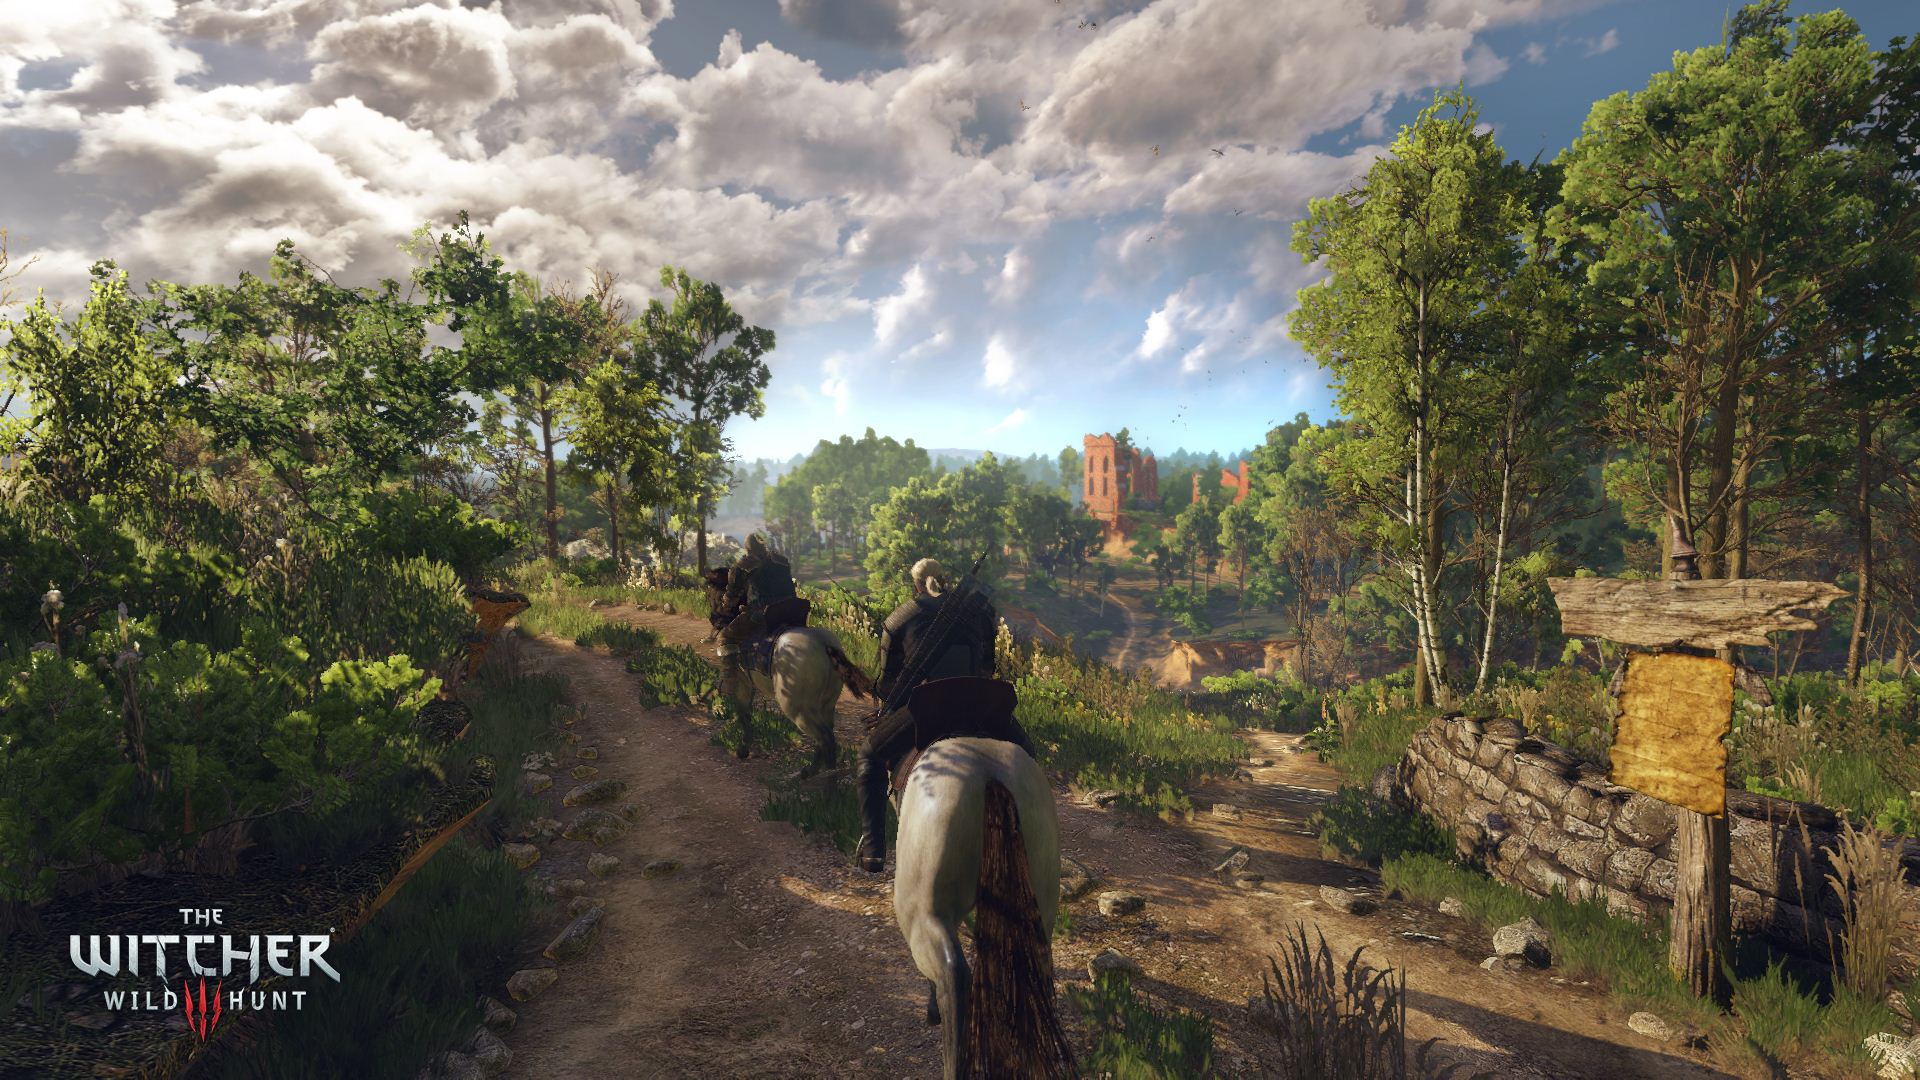 The Witcher 2 is still looking pretty damn good 4 years later with the help  of some mods. Can't say the same for the 360 version. : r/pcmasterrace